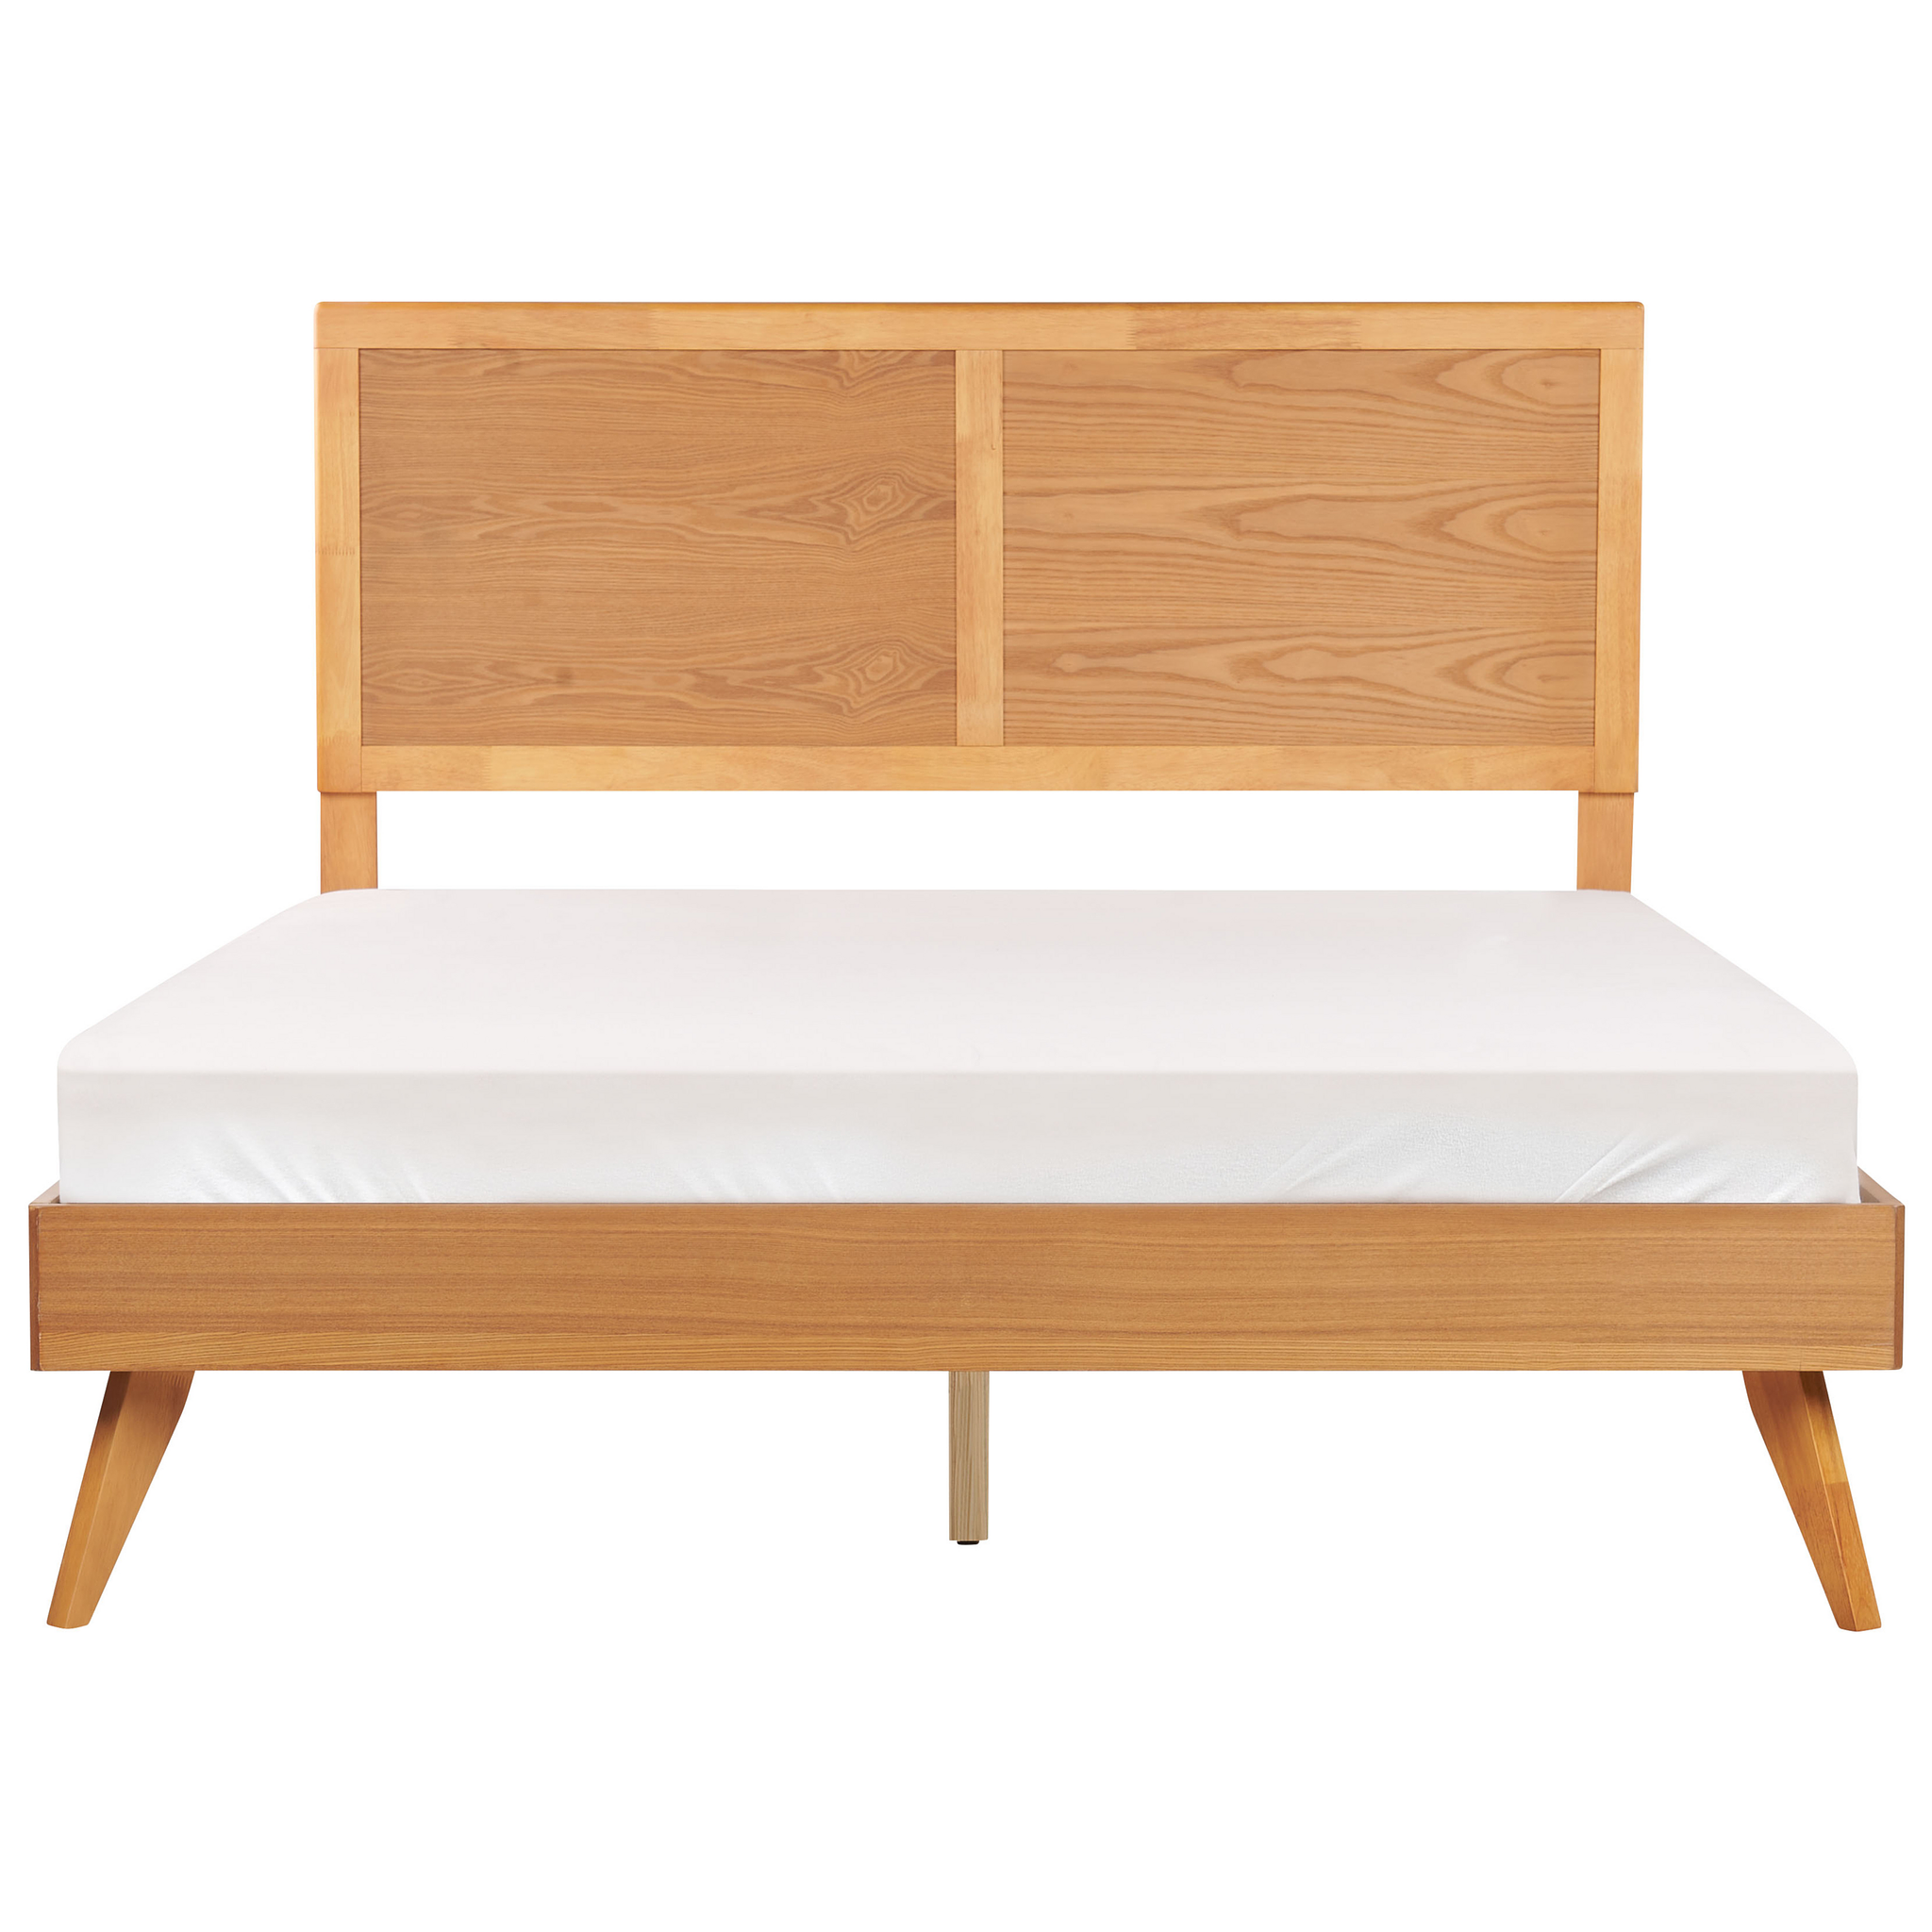 Beliani ISTRES - Tweepersoonsbed - Lichthout - 160 x 200 cm - MDF